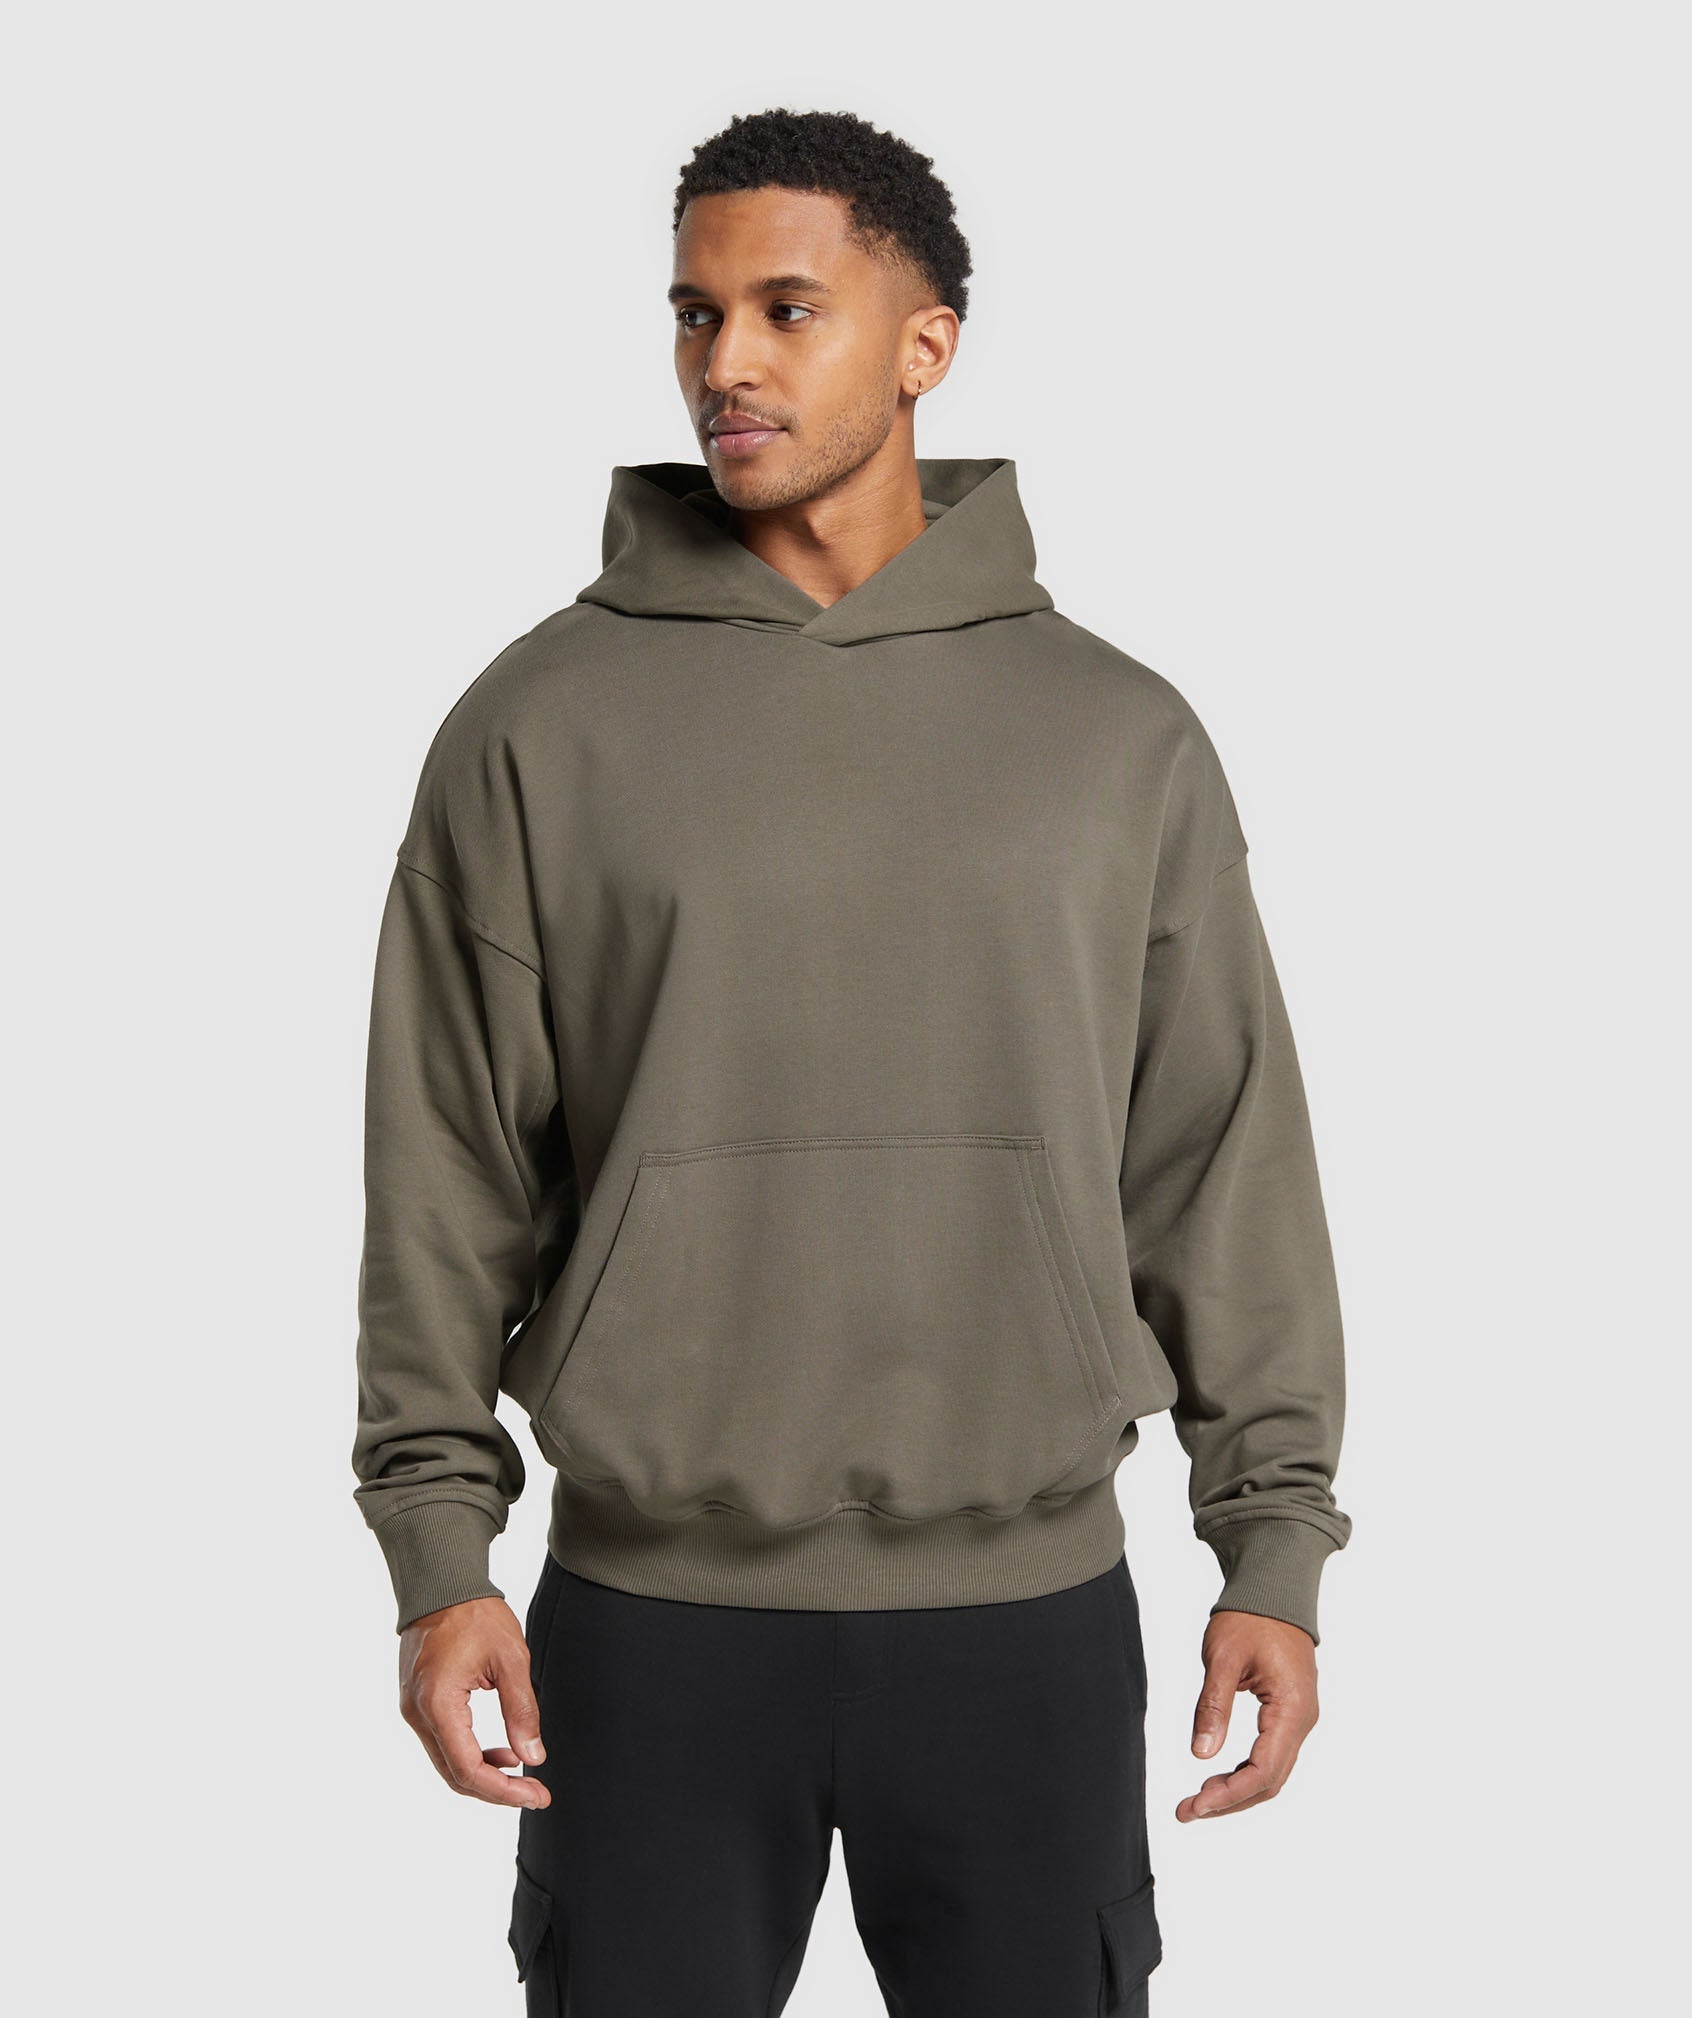 Rest Day Essentials Hoodie in Camo Brown is out of stock